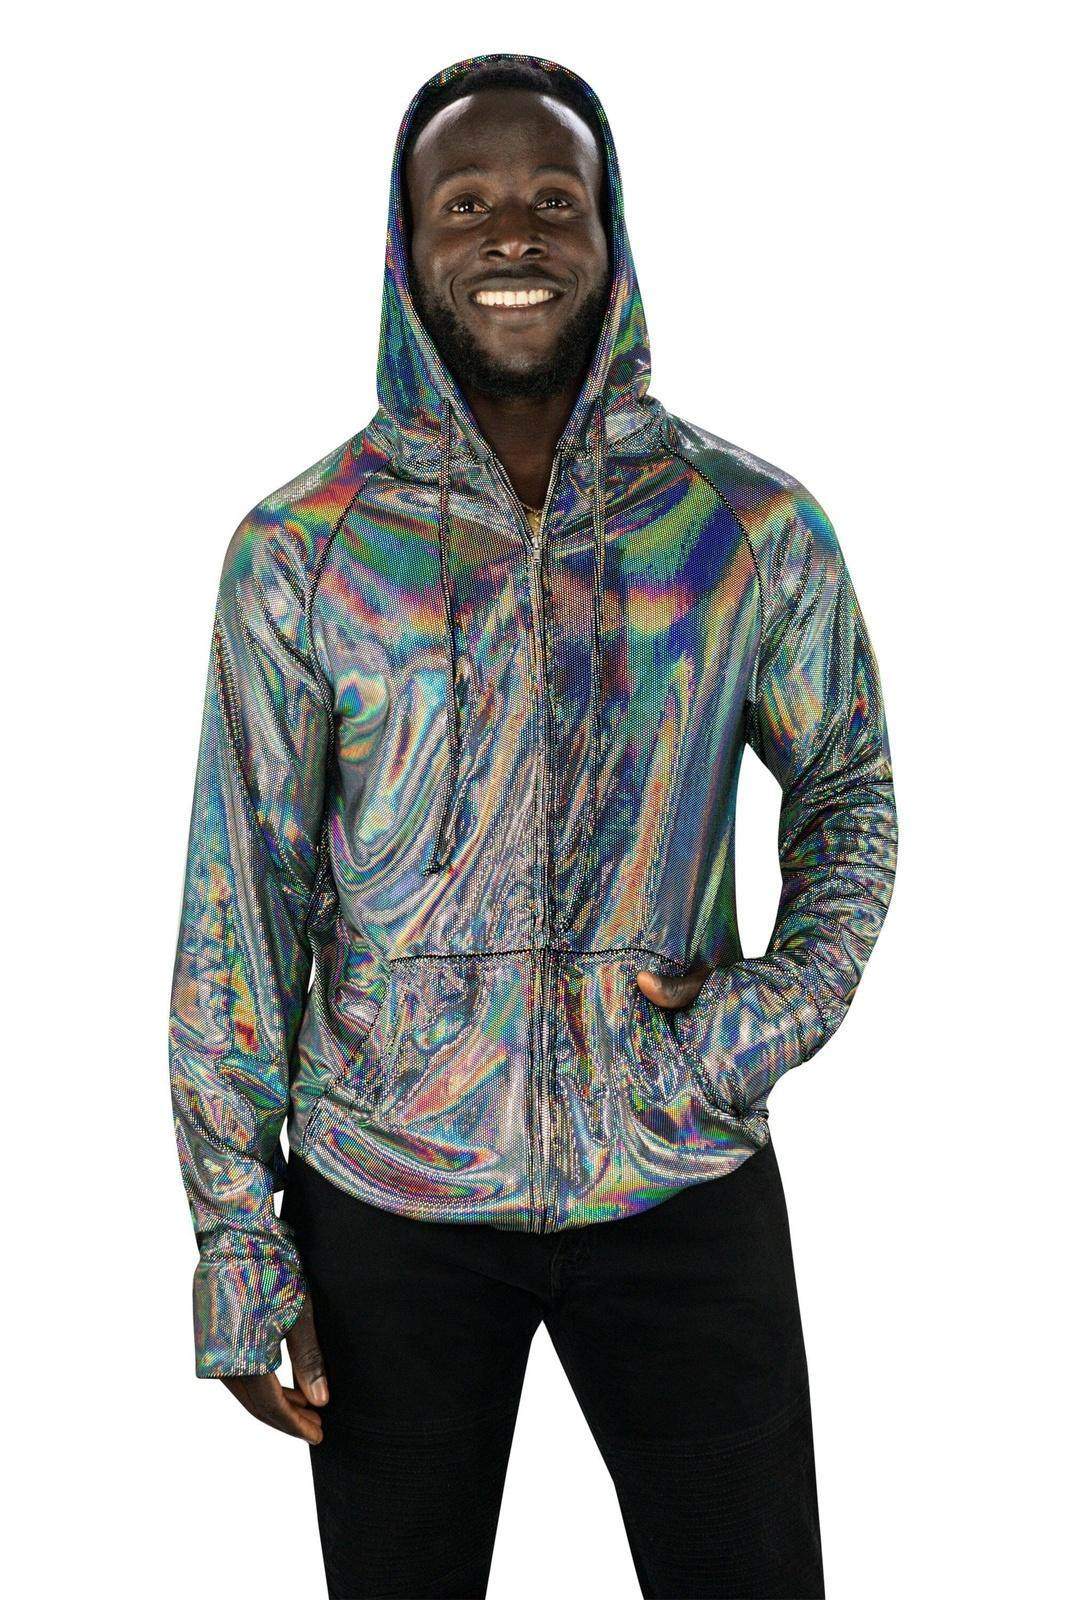 Holographic Hoodie by Love Khaos mens Festival Clothing Brand